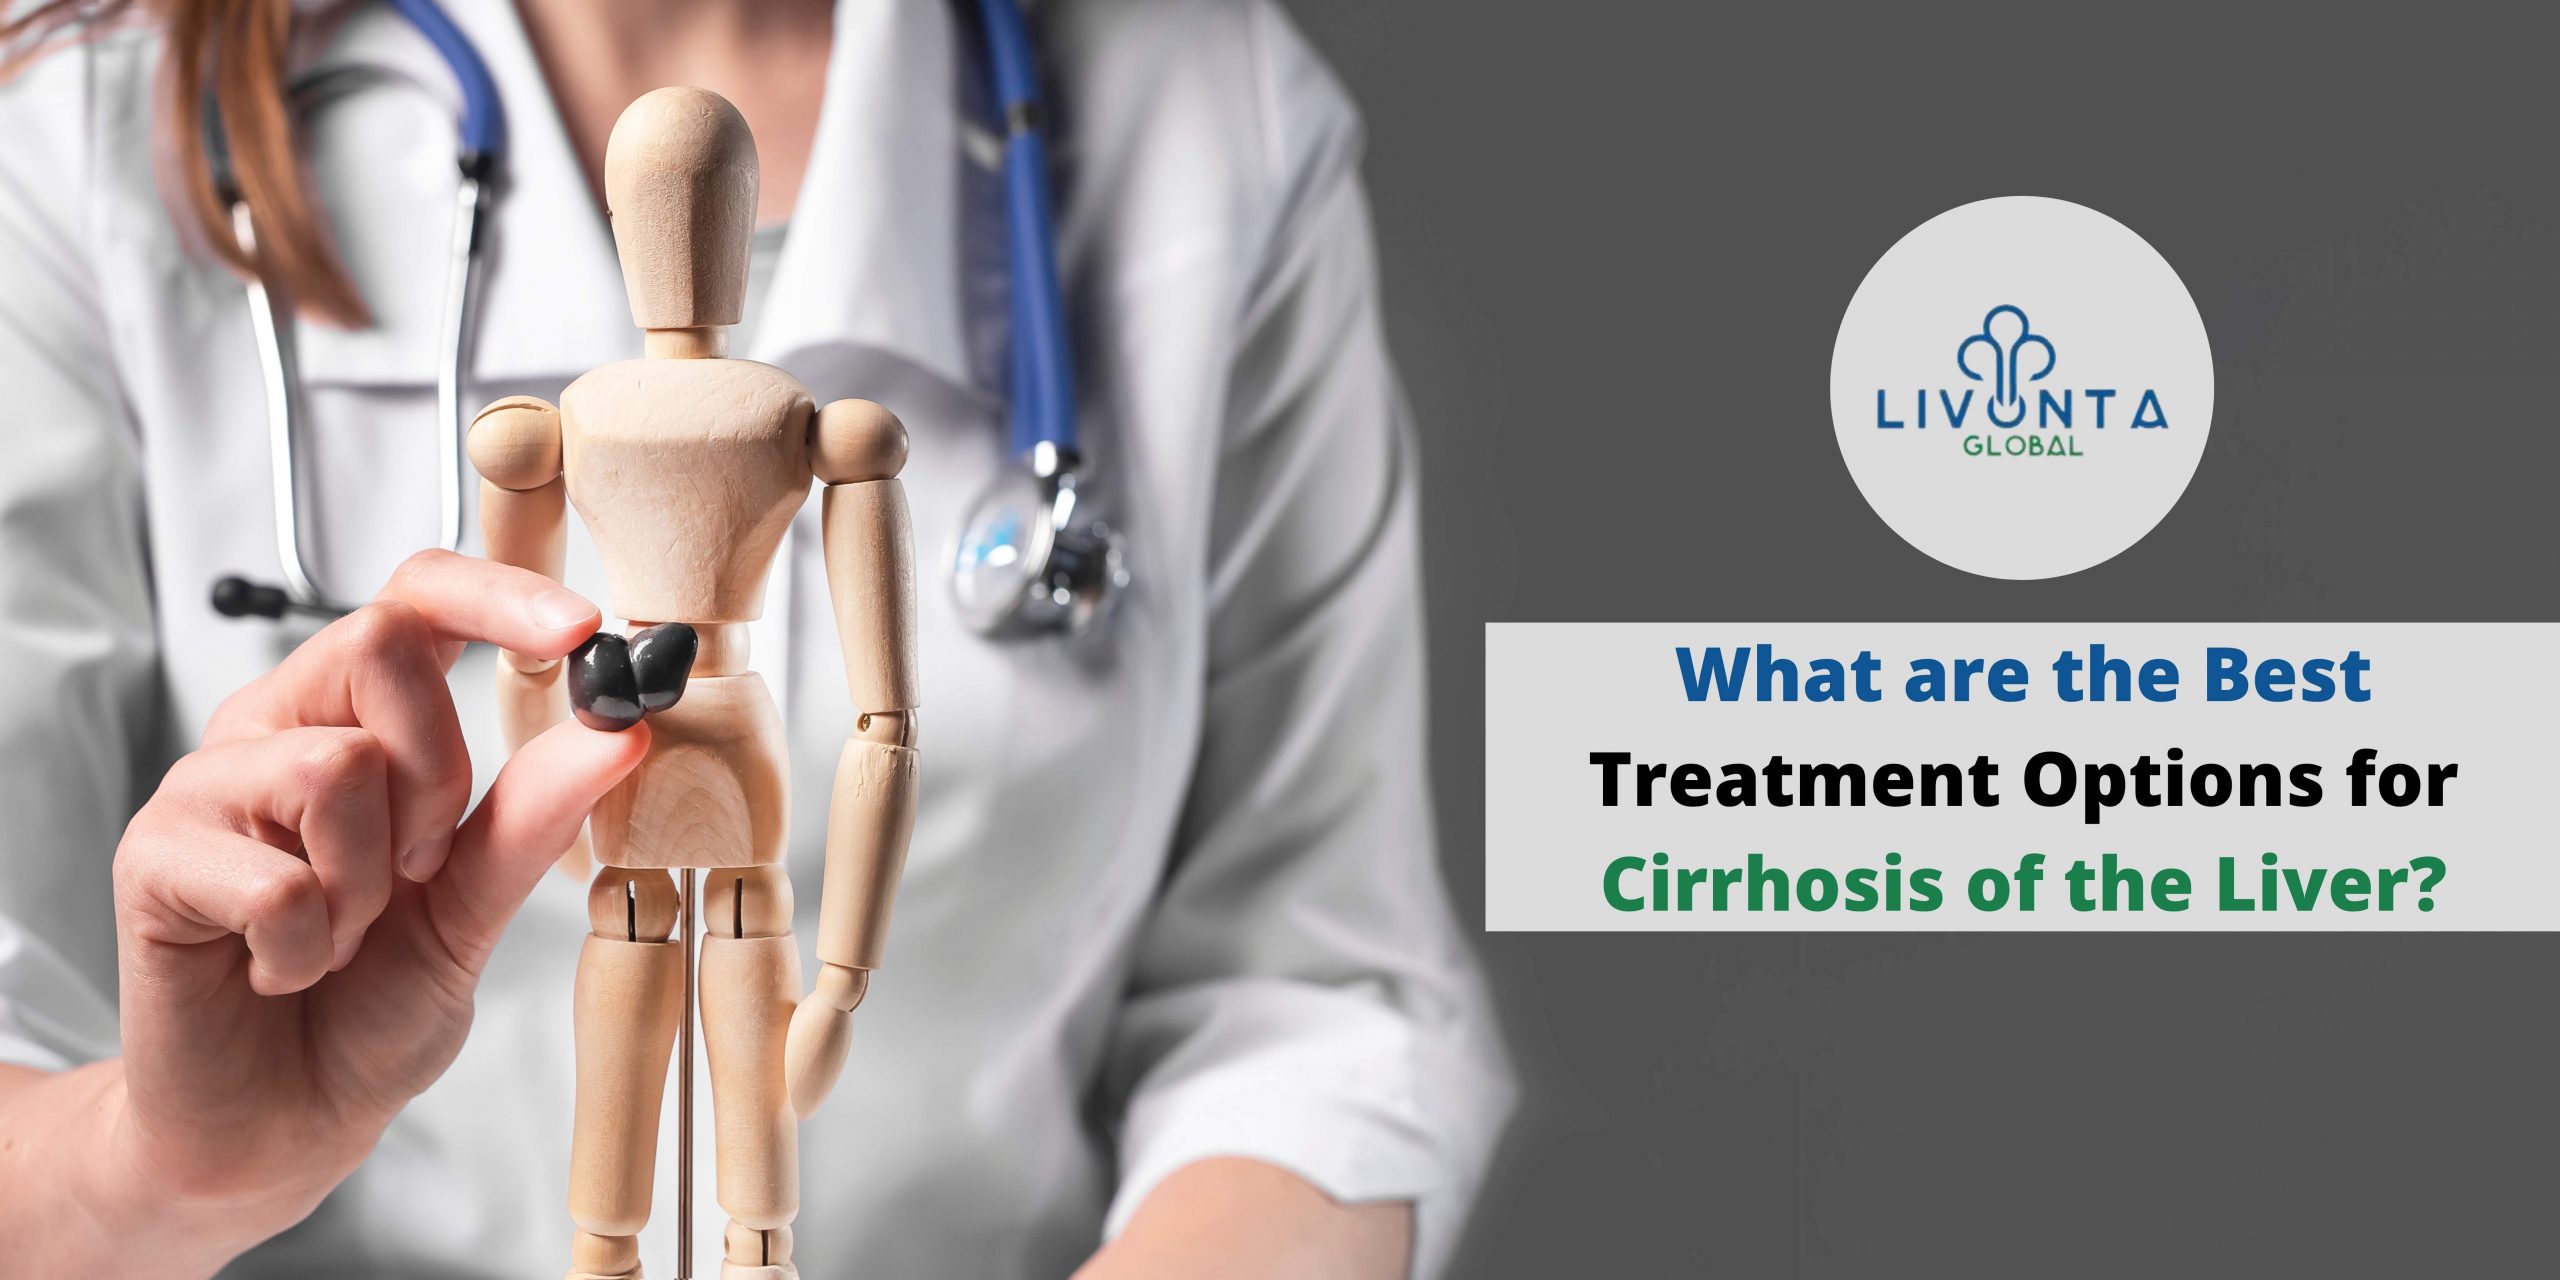 What are the Best Treatment Options for Cirrhosis of the Liver